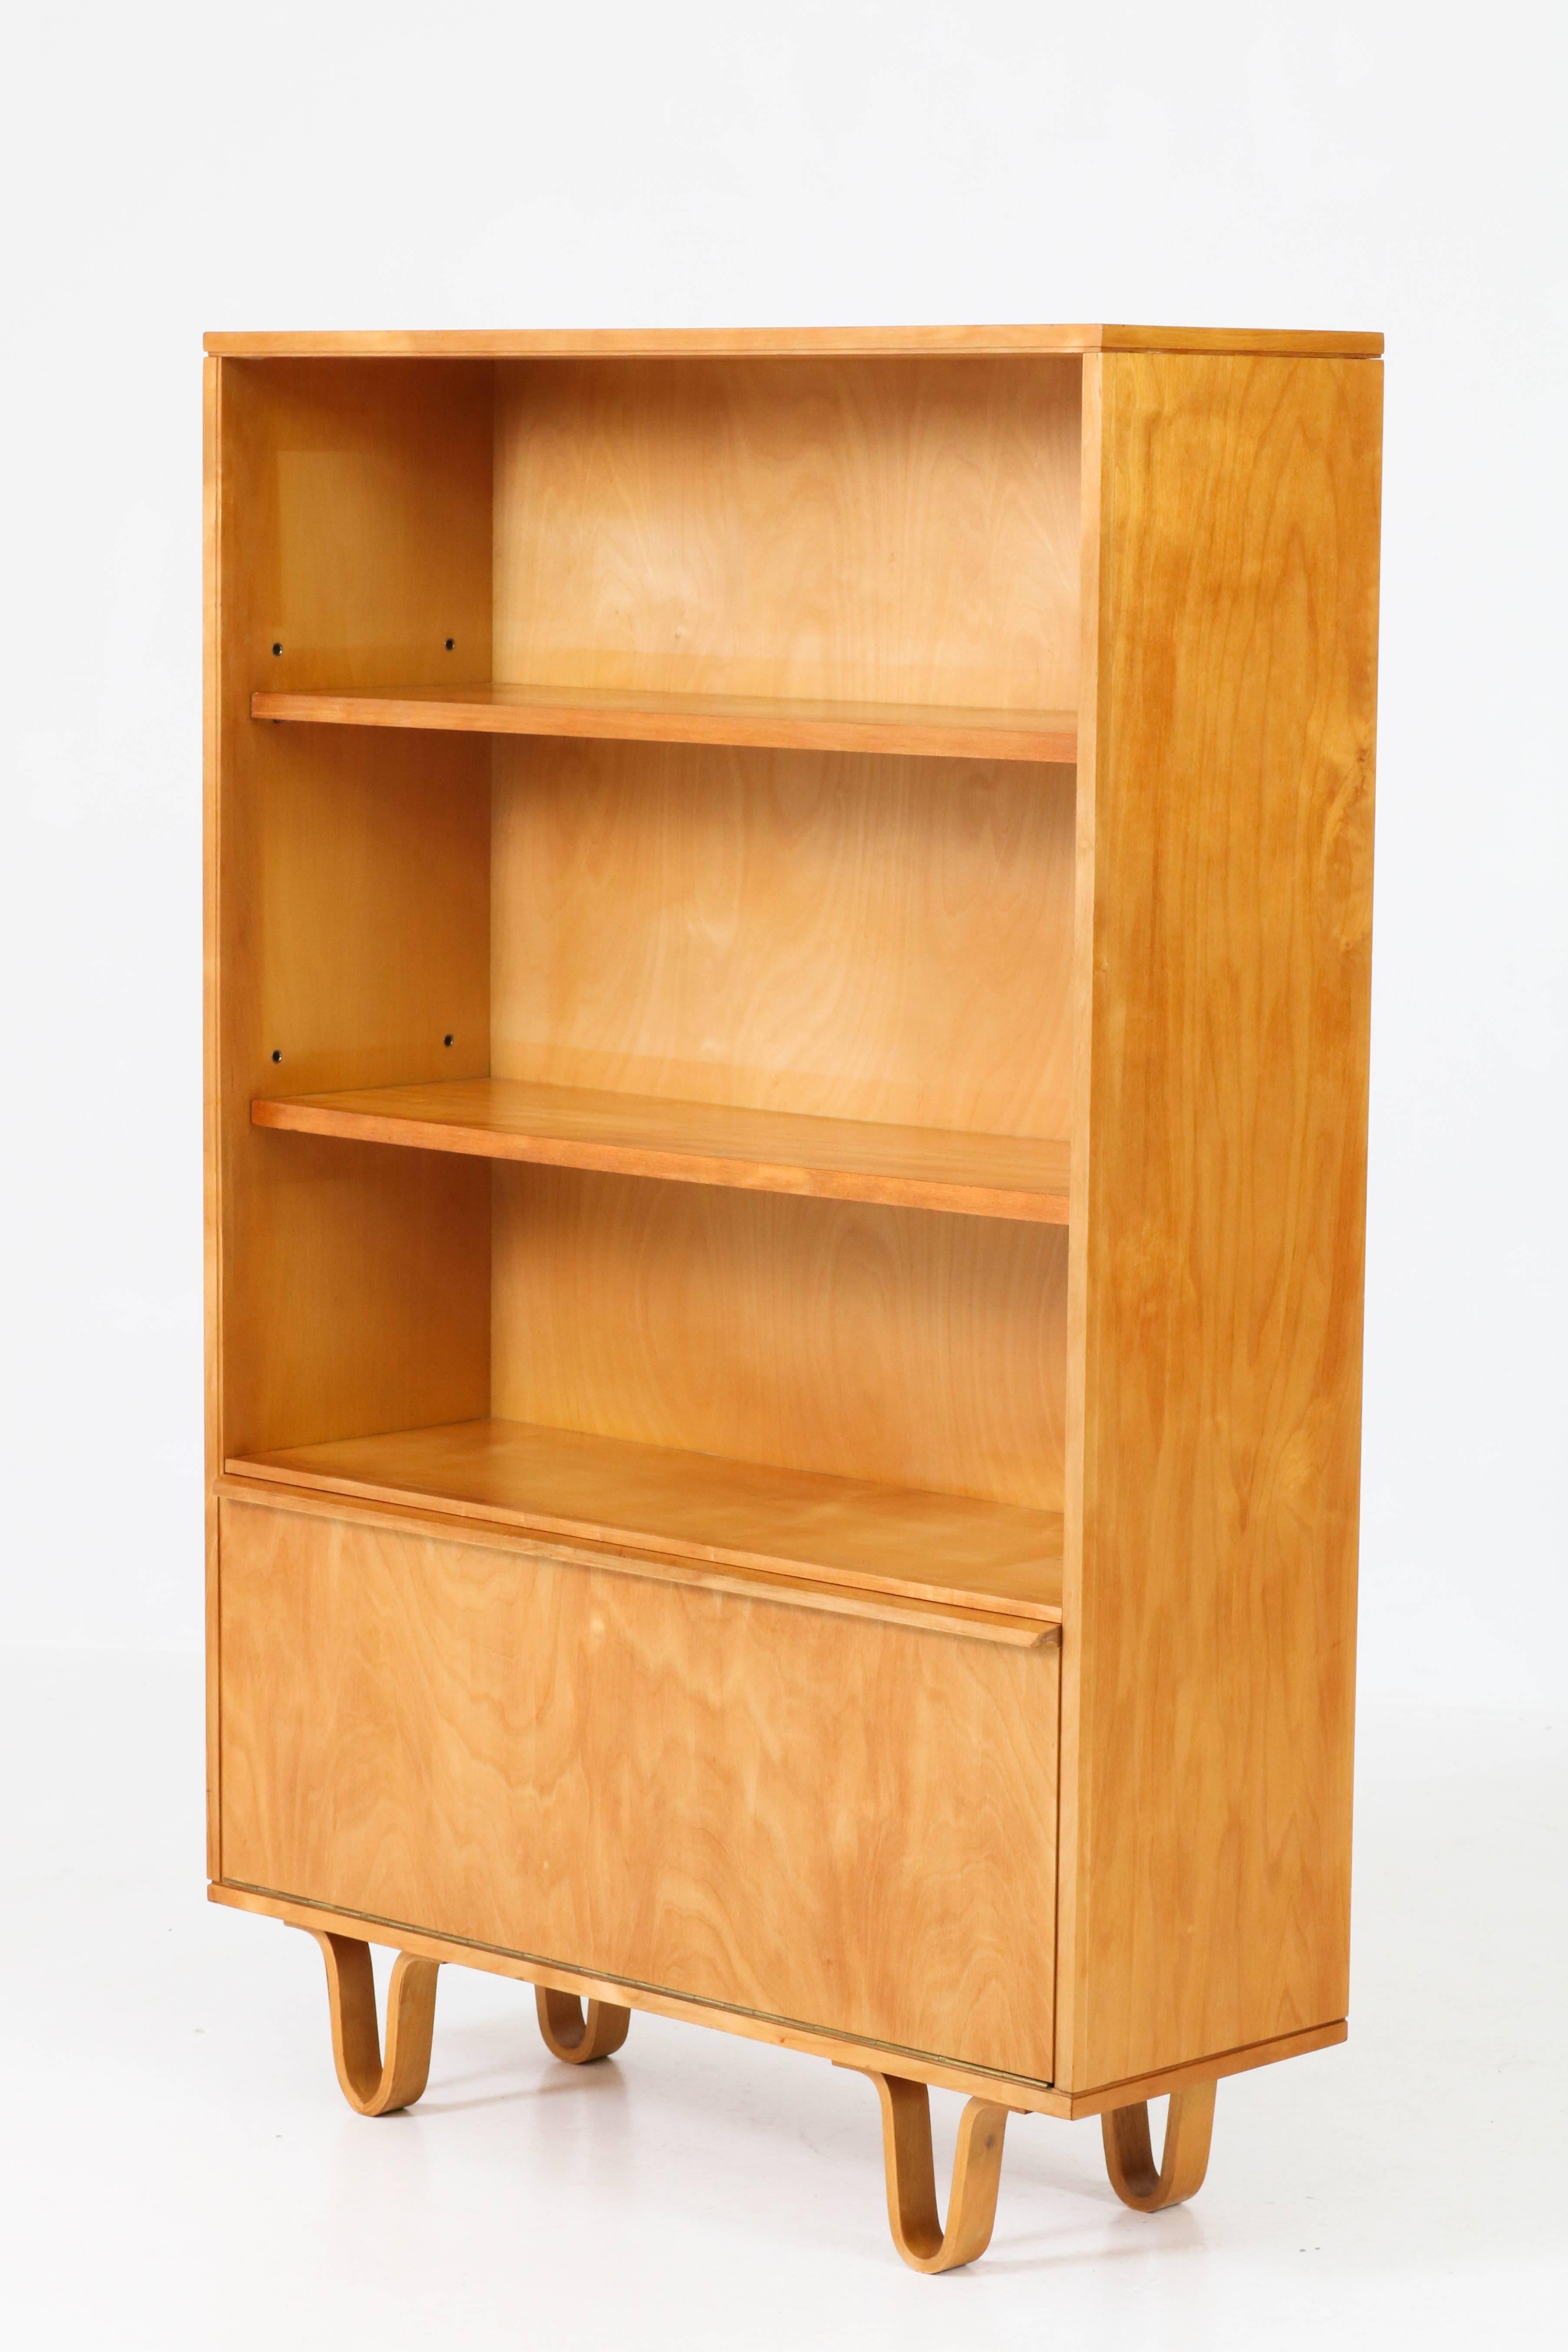 Stunning birch Mid-Century Modern BB03 bookcase by Cees Braakman for Pastoe, 1950s.
This design from the birch series is well known for the typical bended leg
Marked with metal tag.
Exept for some minor scratches on the top,in good condition with